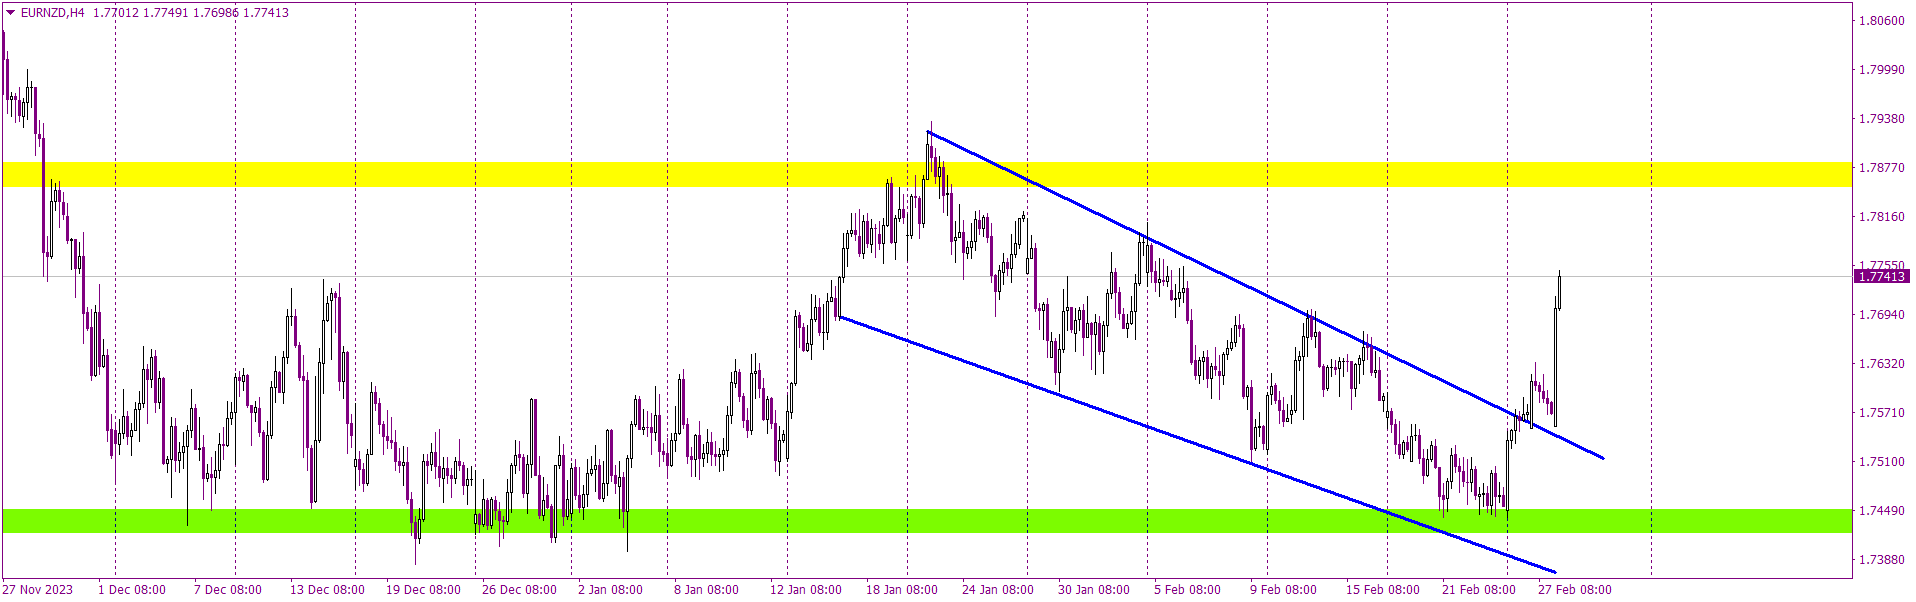 Rate Statements Propel EURNZD Toward Resistance